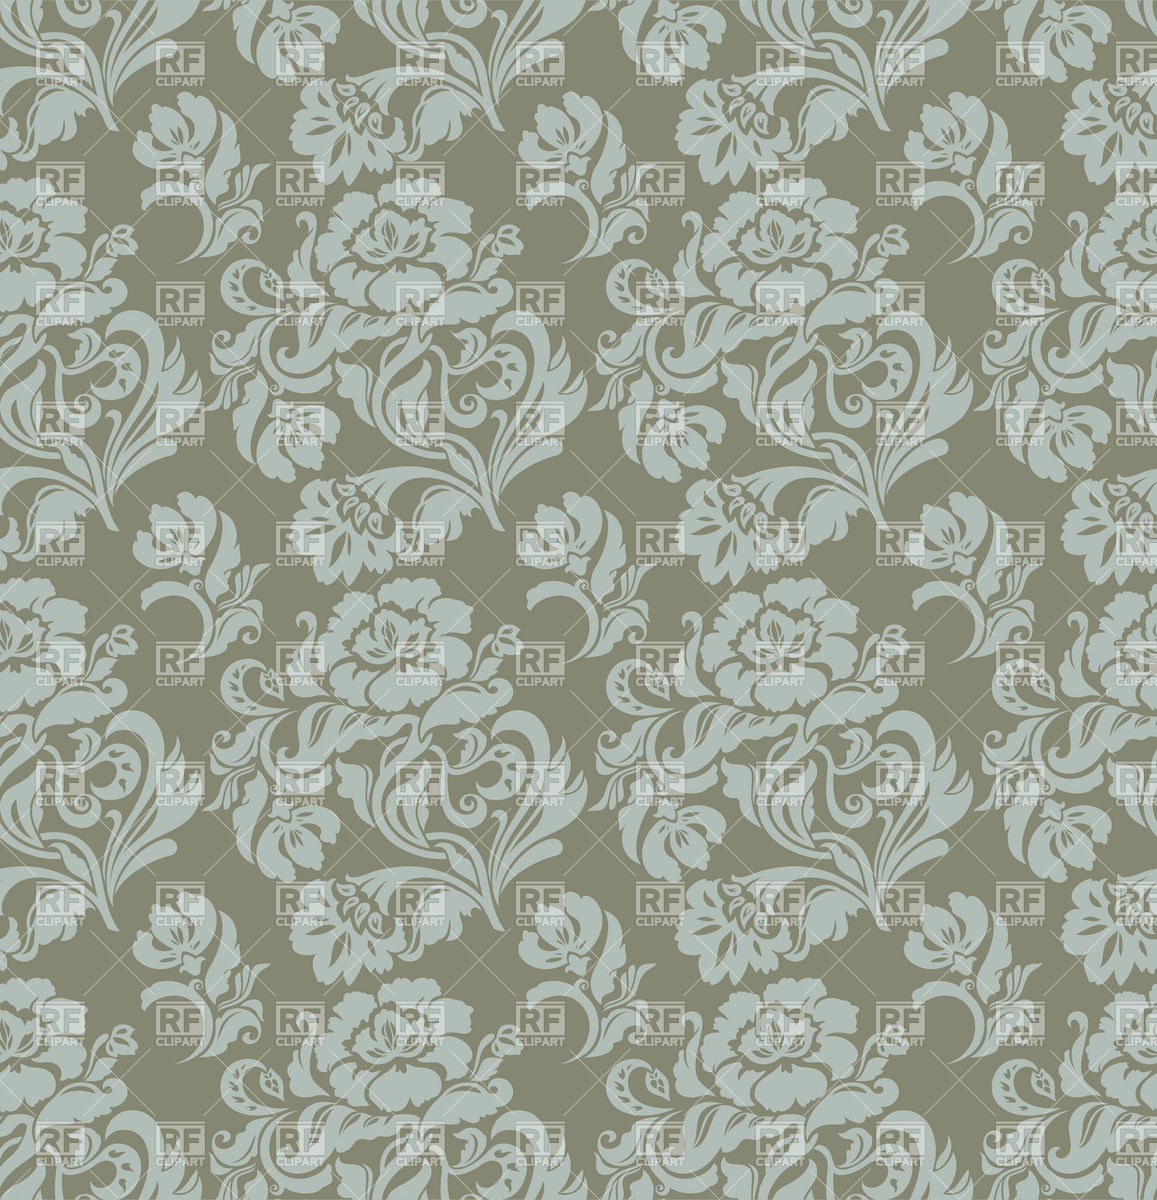 Seamless Gray Floral Victorian Wallpaper Background Textures